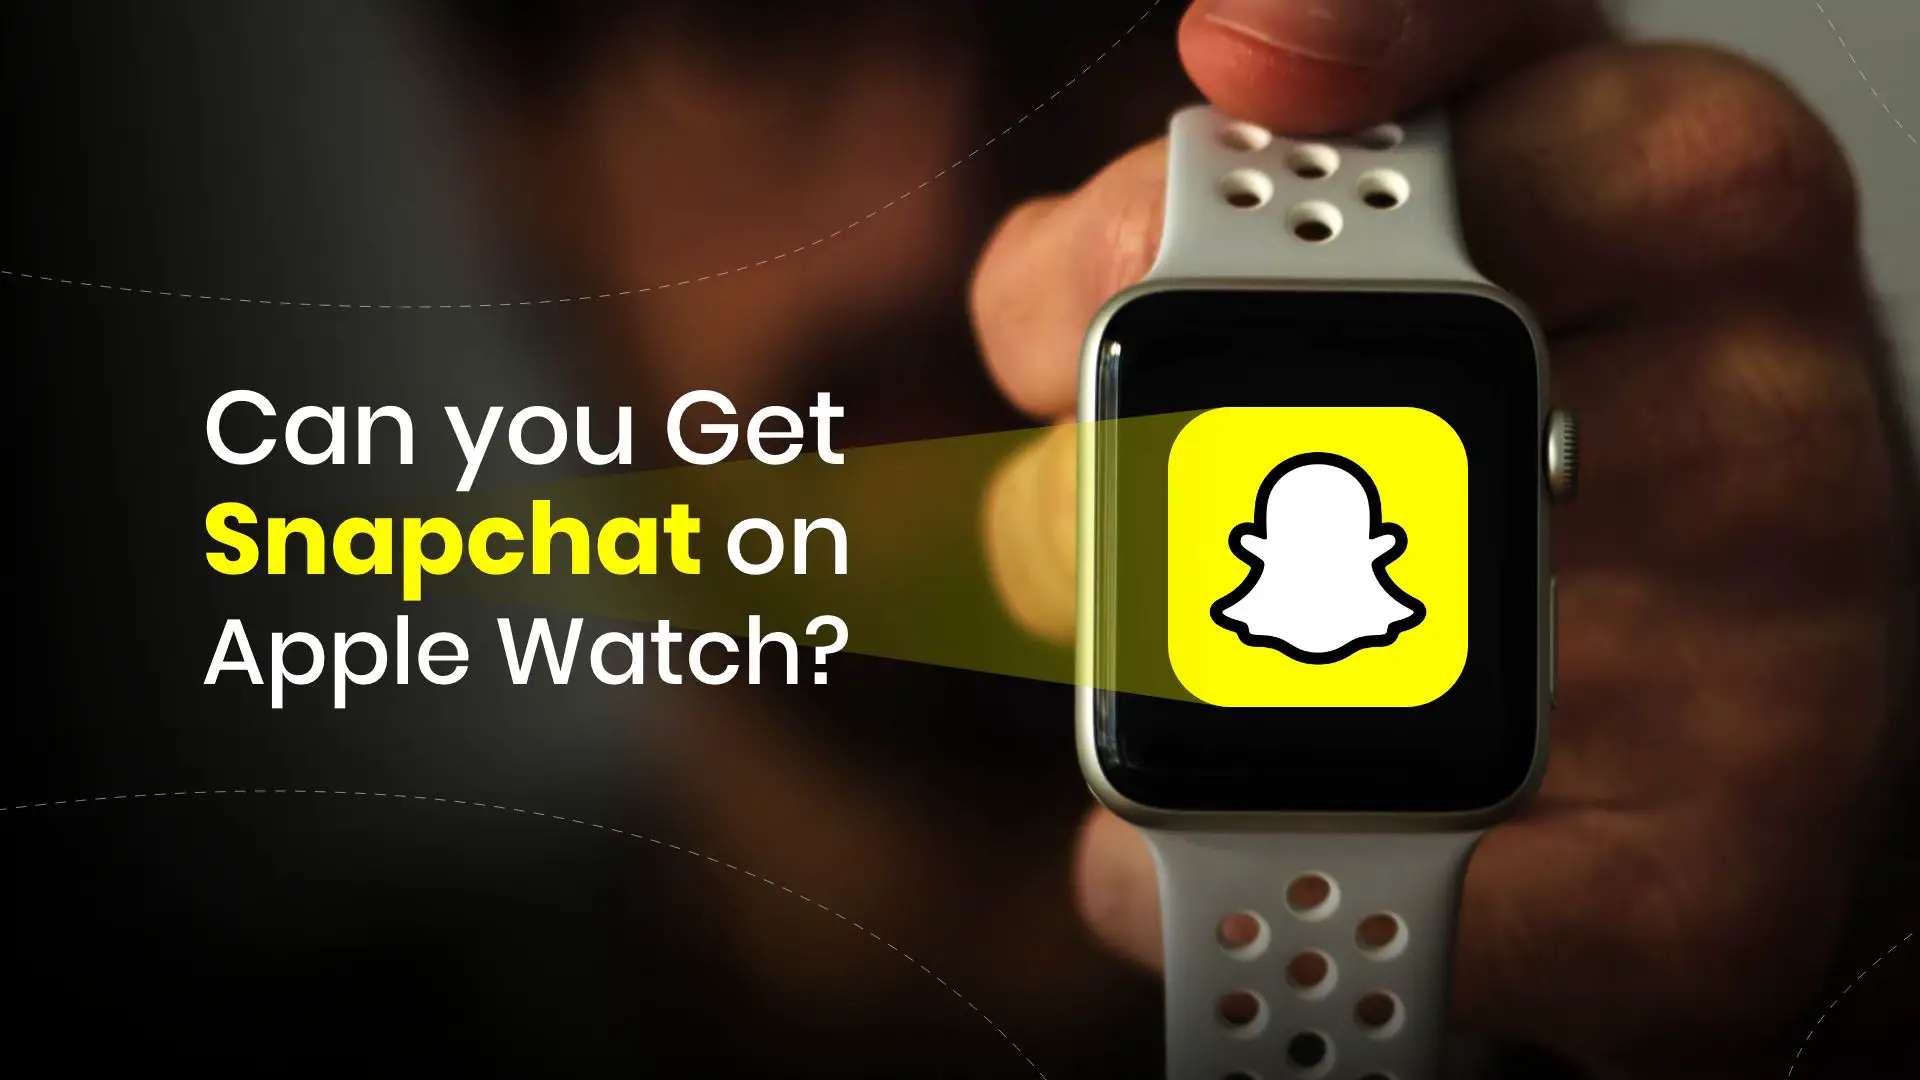 Can you get Snapchat on Apple Watch